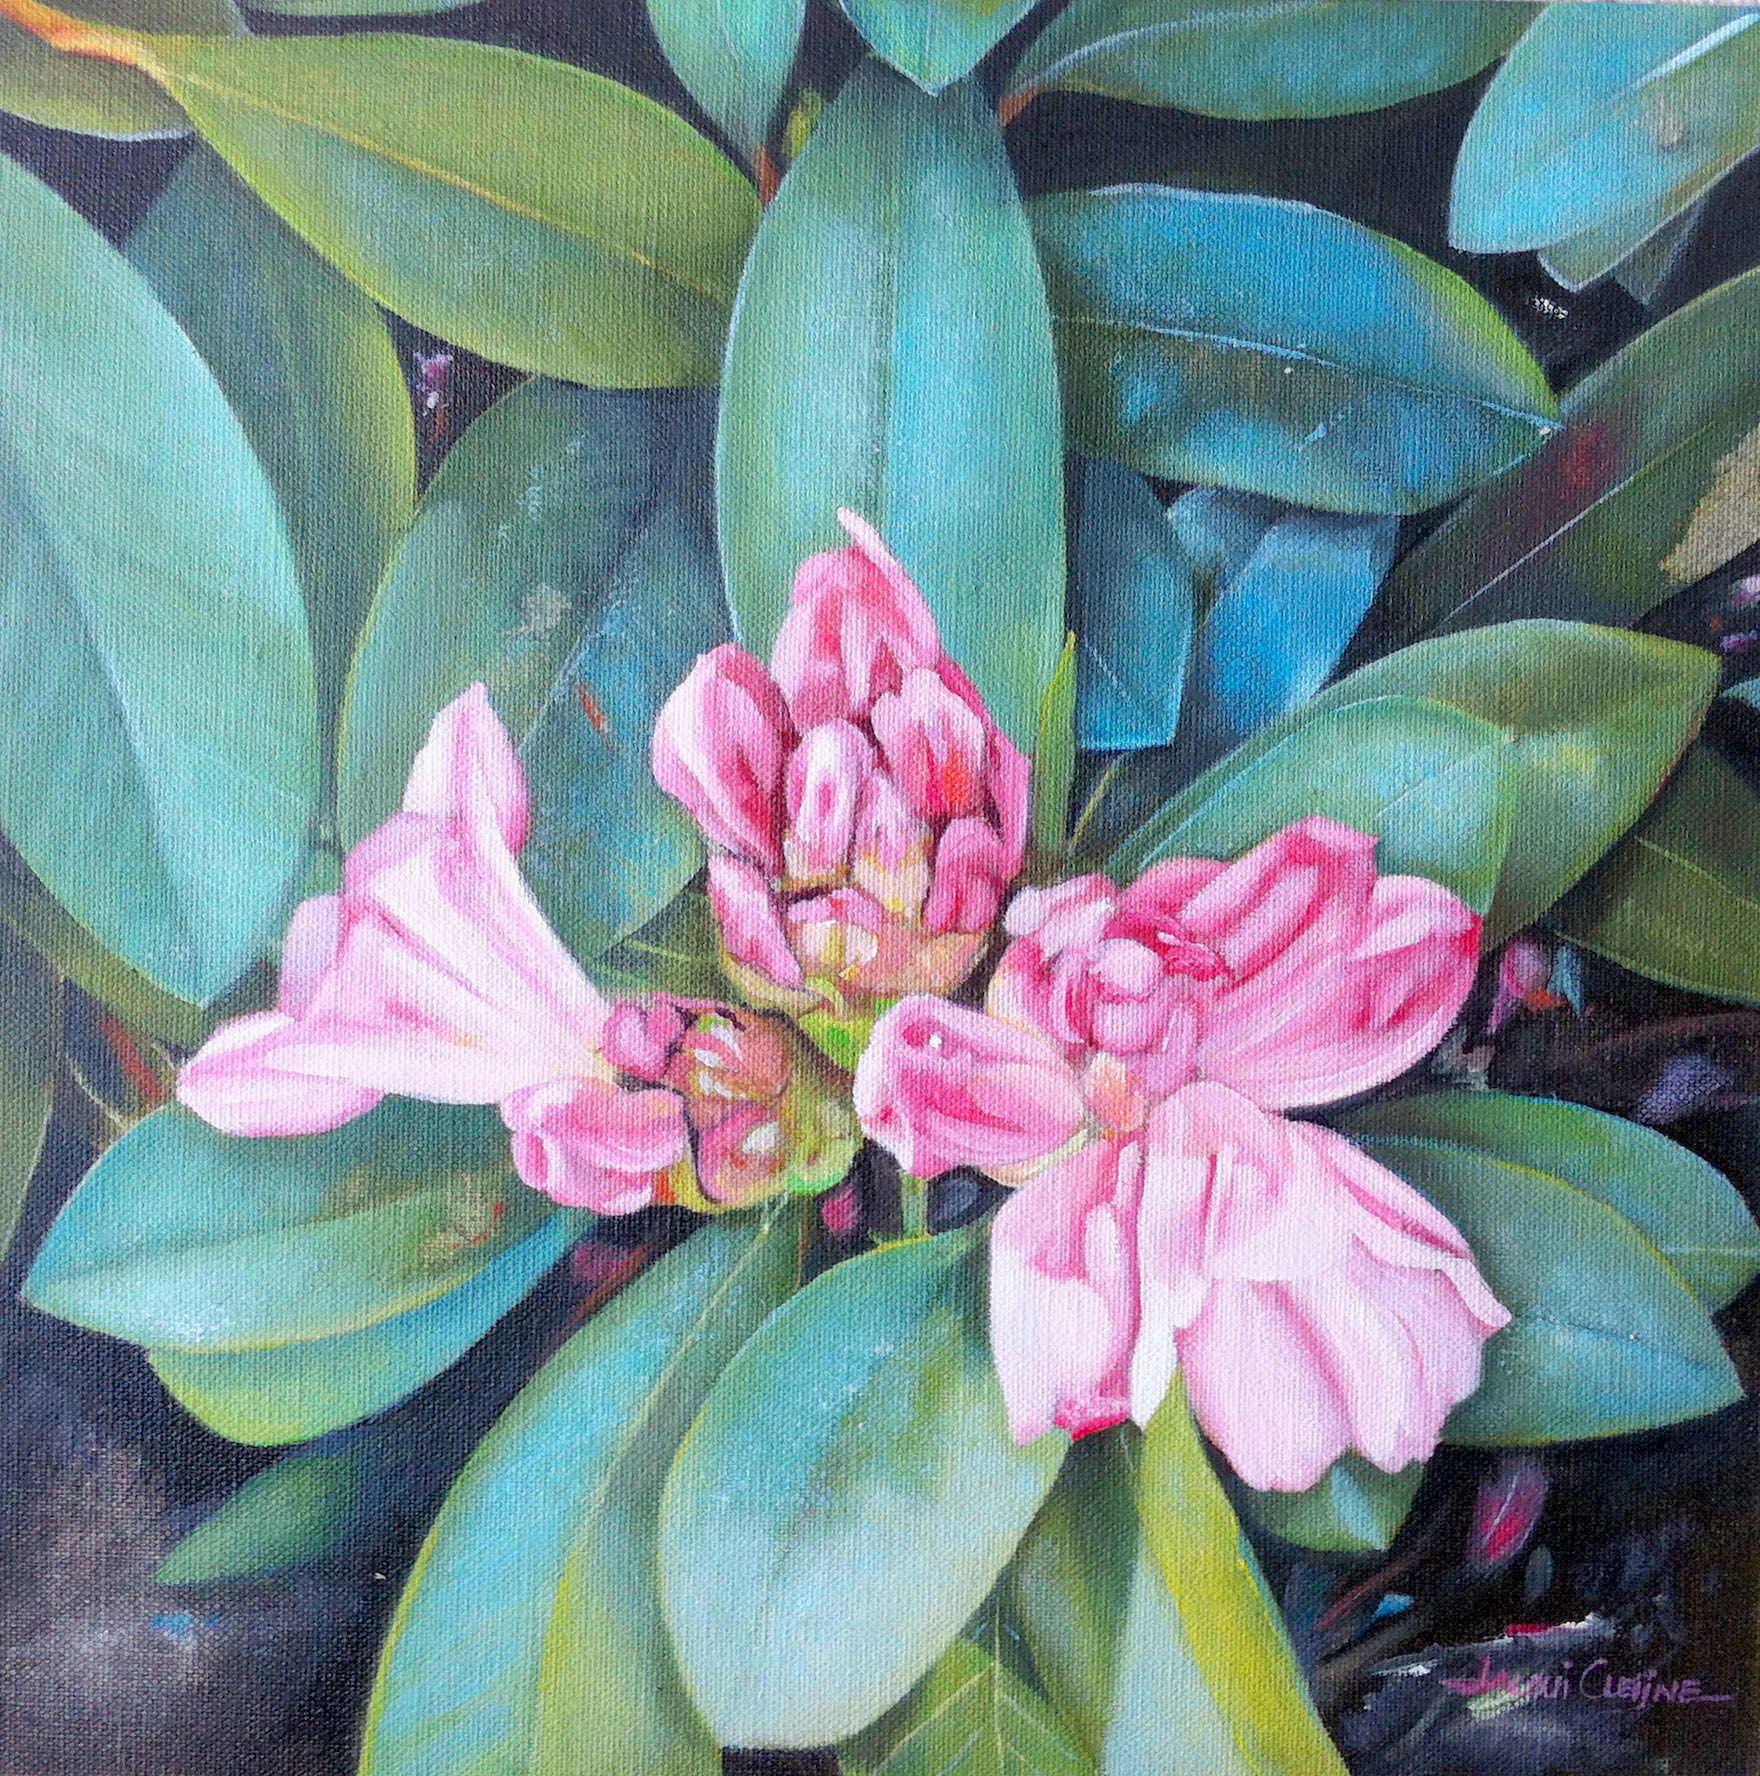 Rhododendron Flower - FOR SALE